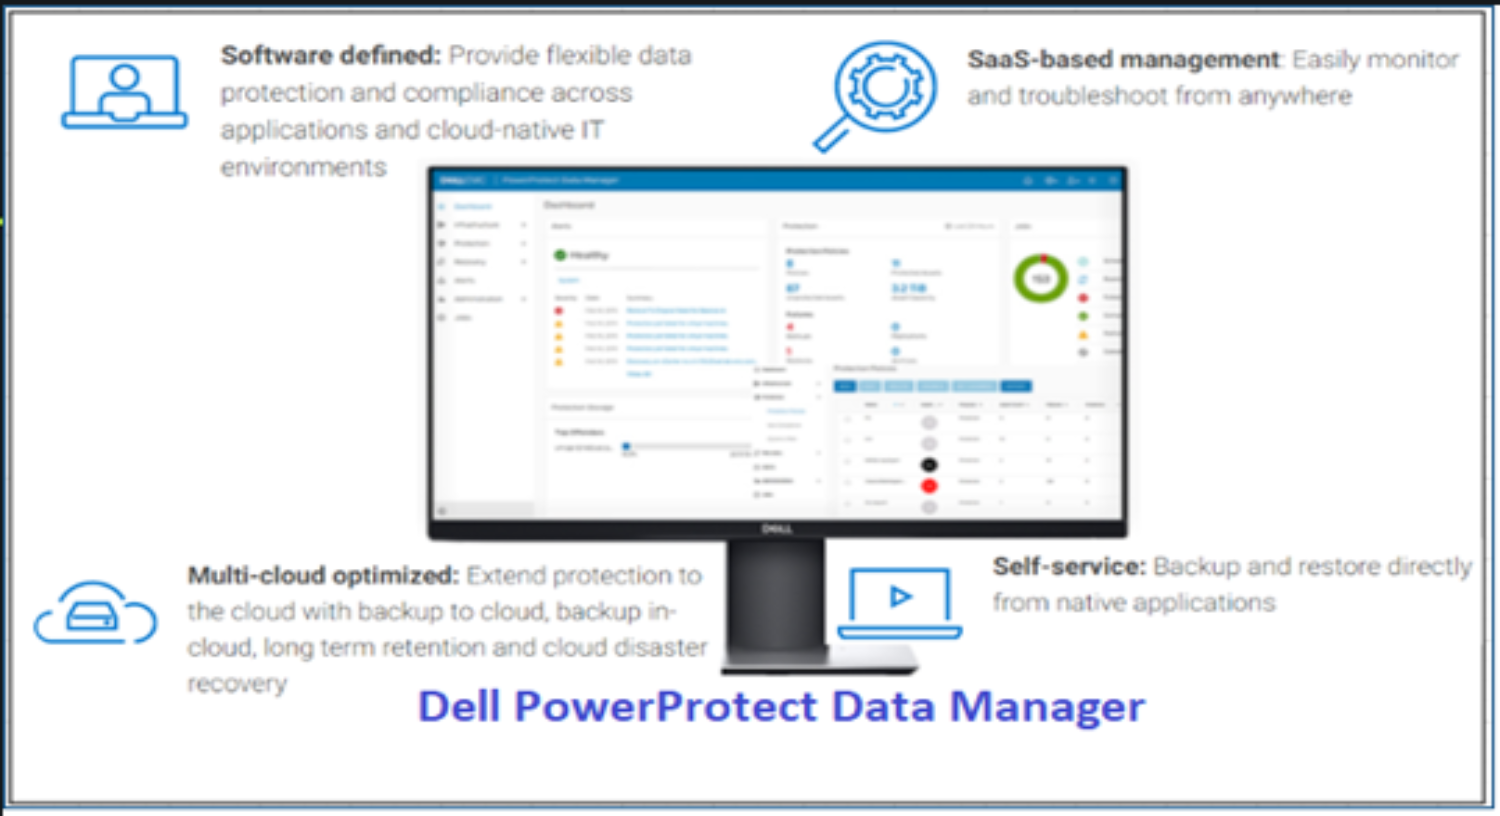 This figure shows the Dell PowerProtect Data Manager features. - Software Defined, SaaaS-based Management, Multi-cloud optimized, and Self-Service.